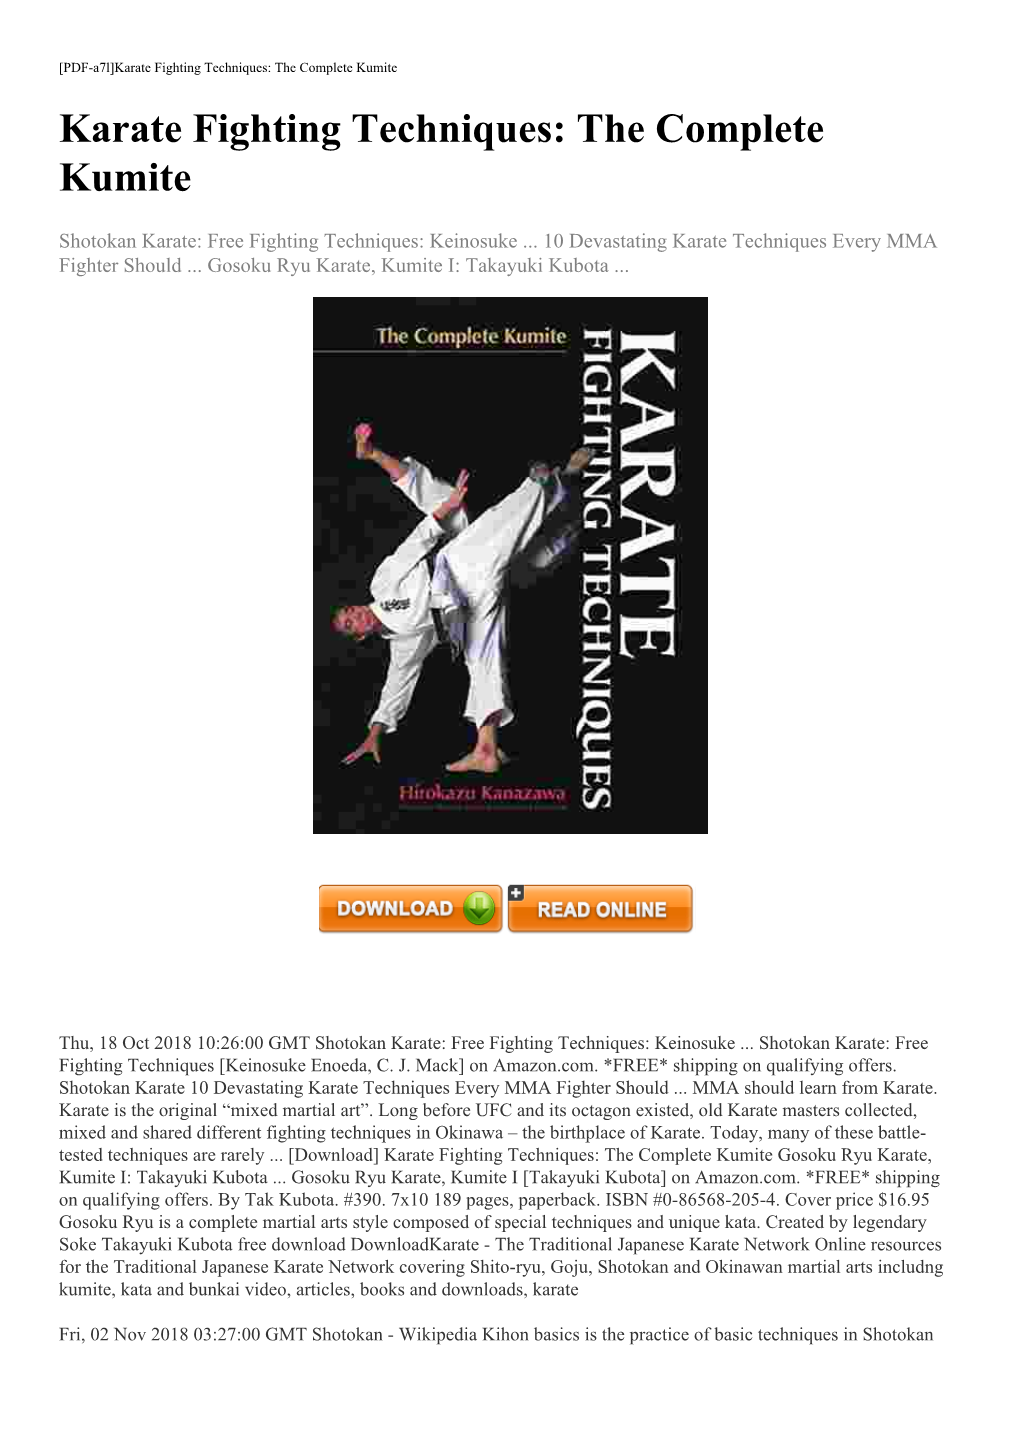 Karate Fighting Techniques: the Complete Kumite Karate Fighting Techniques: the Complete Kumite